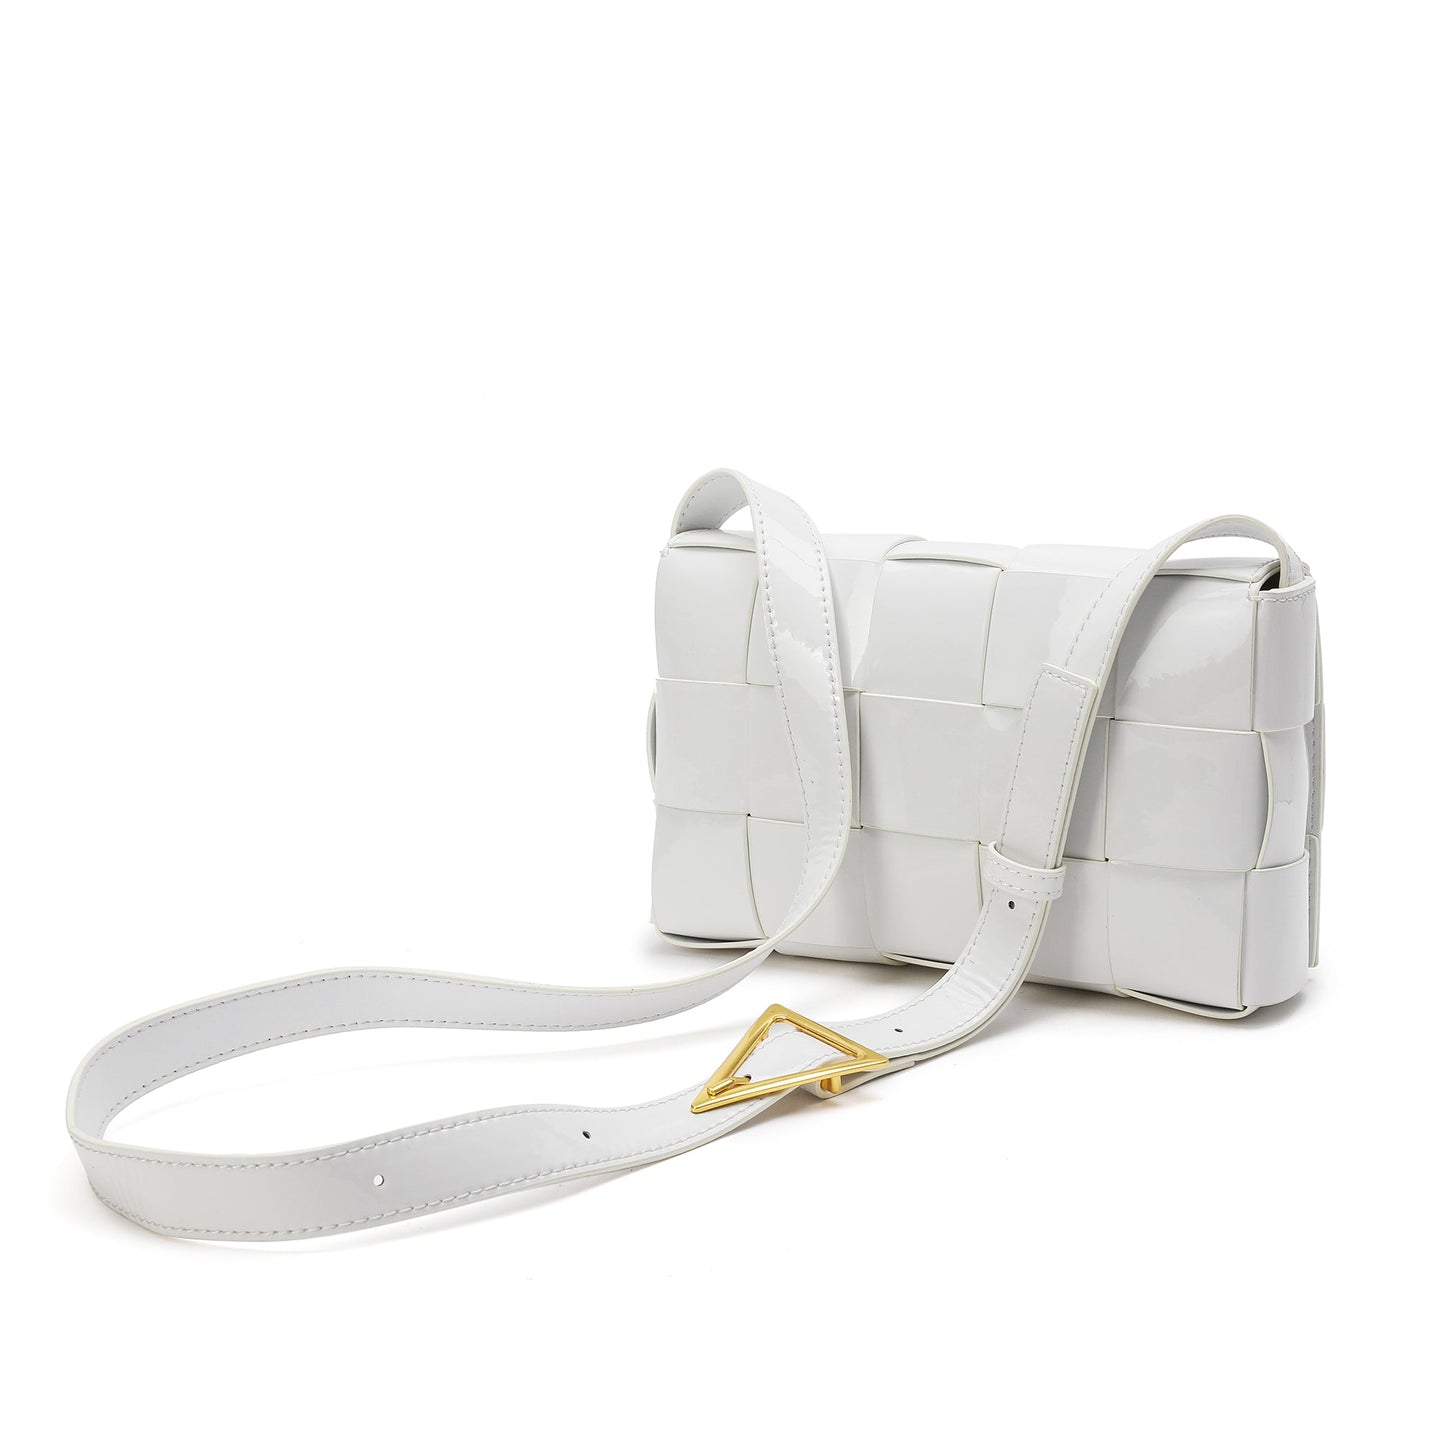 Patent Leather Woven Crossbody